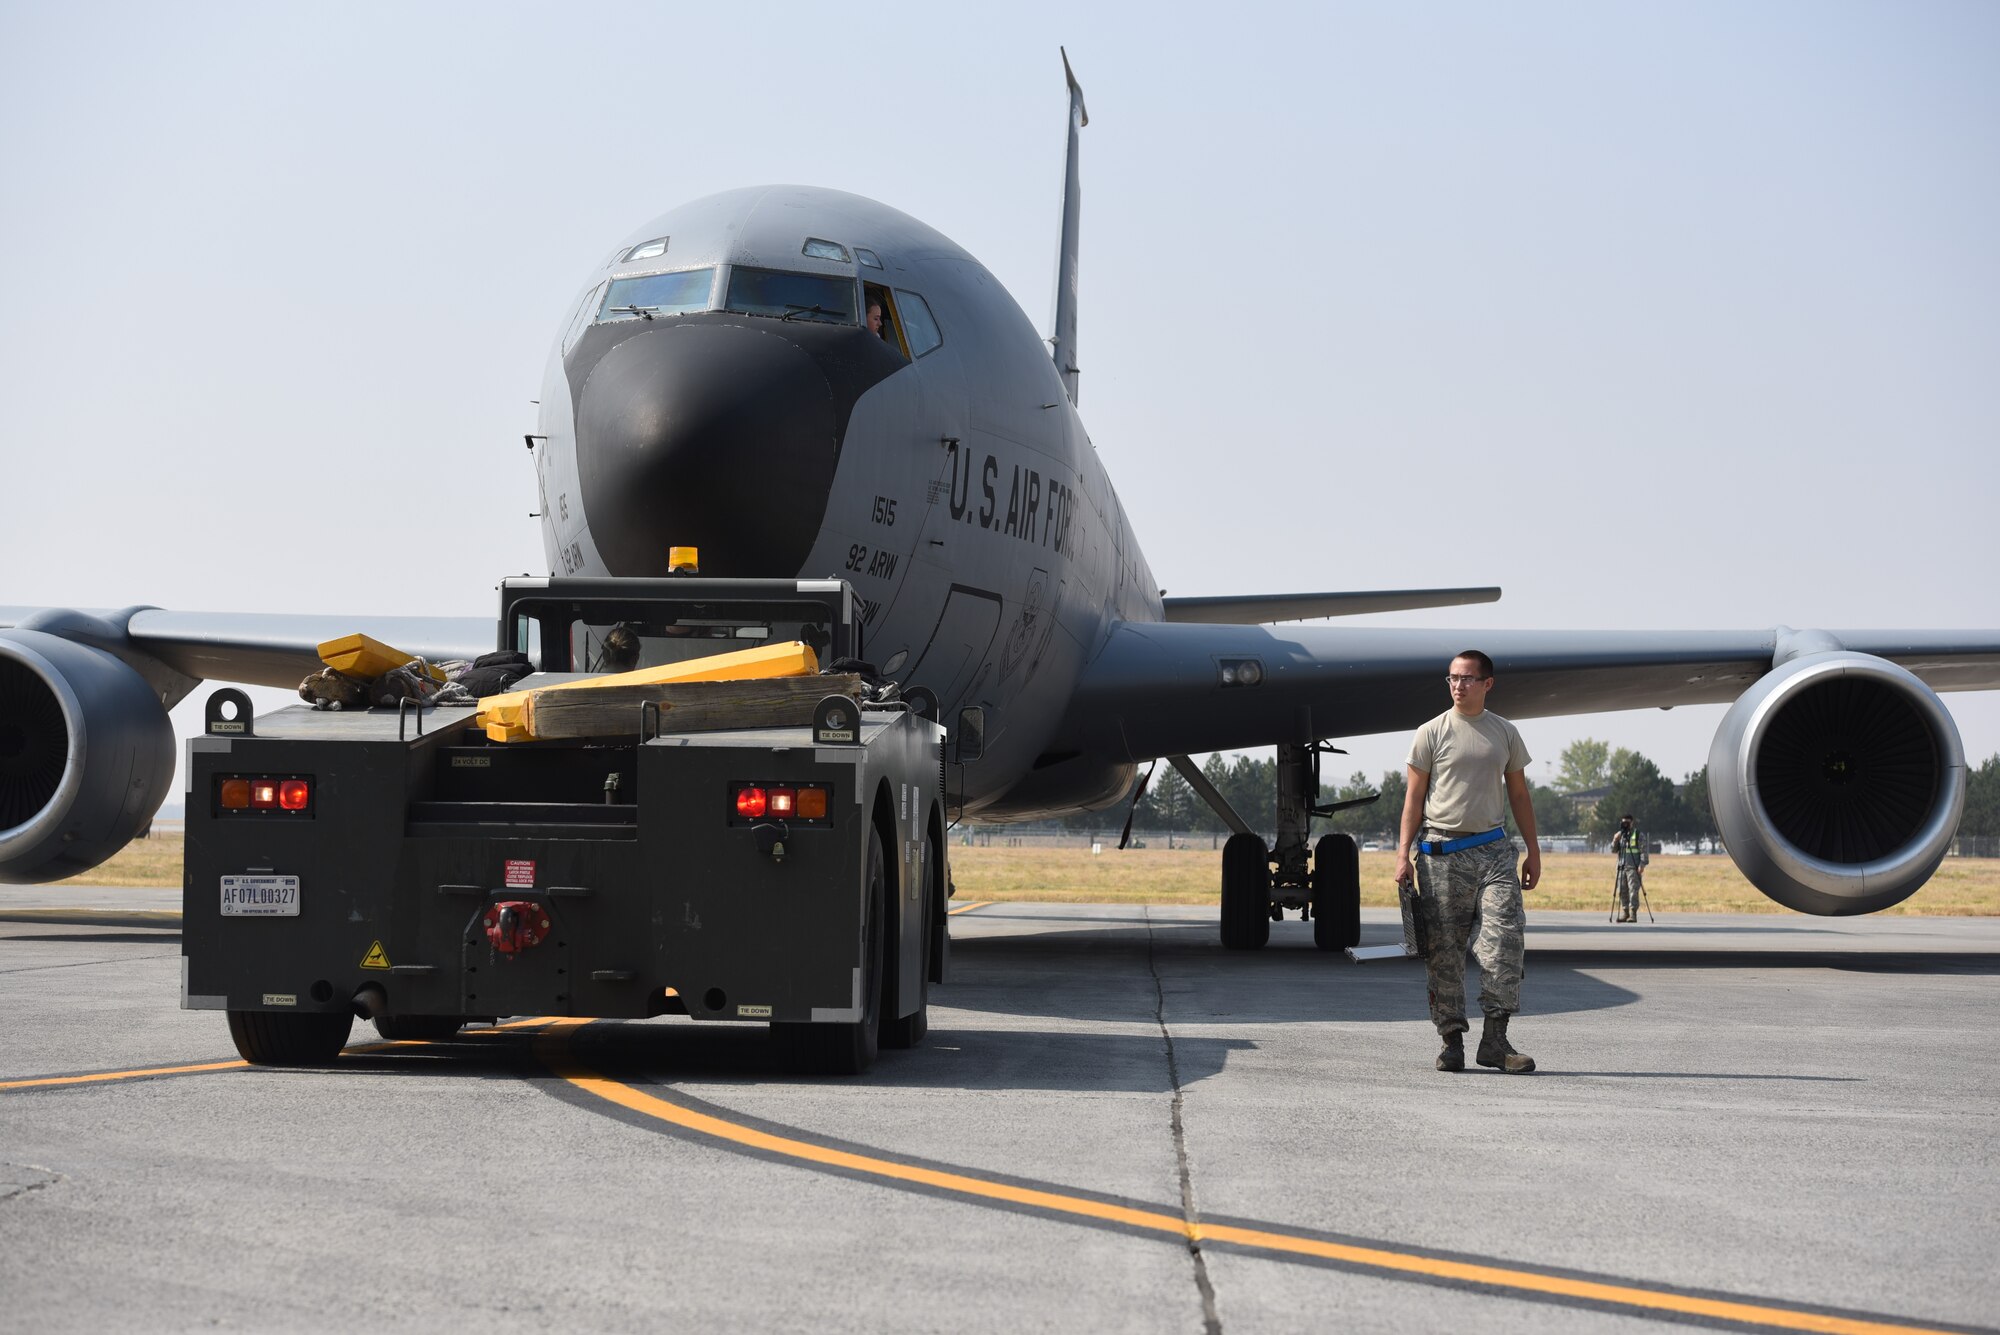 Senior Airman Tyler Turoczy, 92nd Maintenance Squadron crew chief, helps park a KC-135 Stratotanker, assigned to the 92d Air Refueling Wing, Aug. 22, 2018, at Fairchild Air Force Base, Washington. Titan Fury is a readiness exercise used to validate and enhance Fairchild Airmen’s ability to provide Rapid Global Mobility as required by the U.S. Strategic Command and U.S. Transportation Command. (U.S. Air Force photo by Airman 1st Class Lawrence Sena)